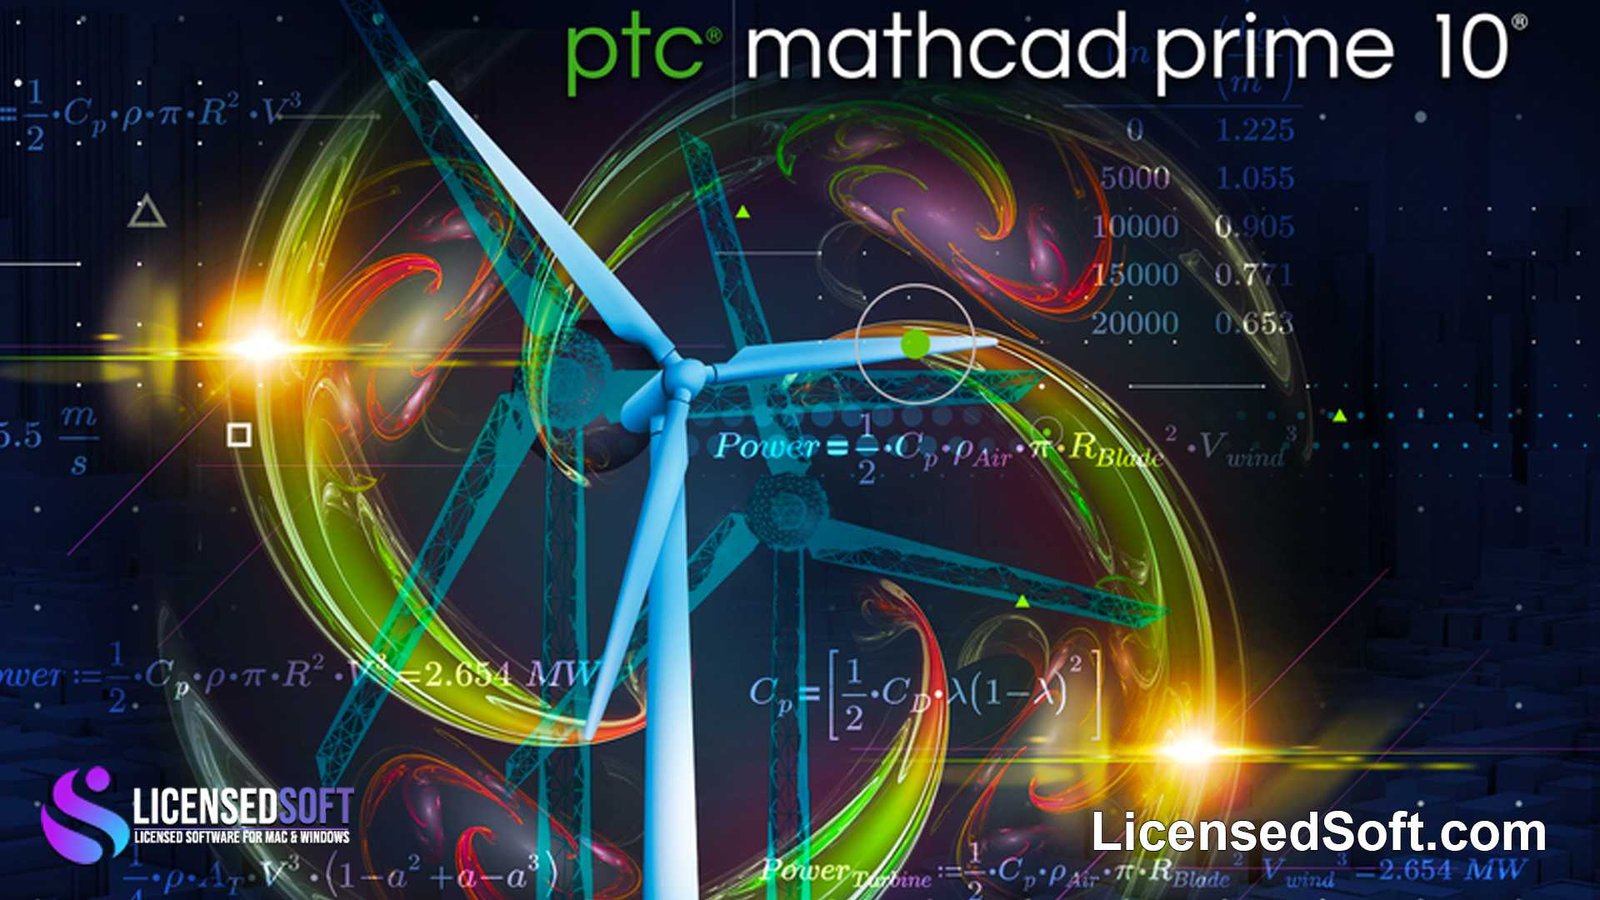 PTC Mathcad Prime 10 Perpetual License By LicensedSoft